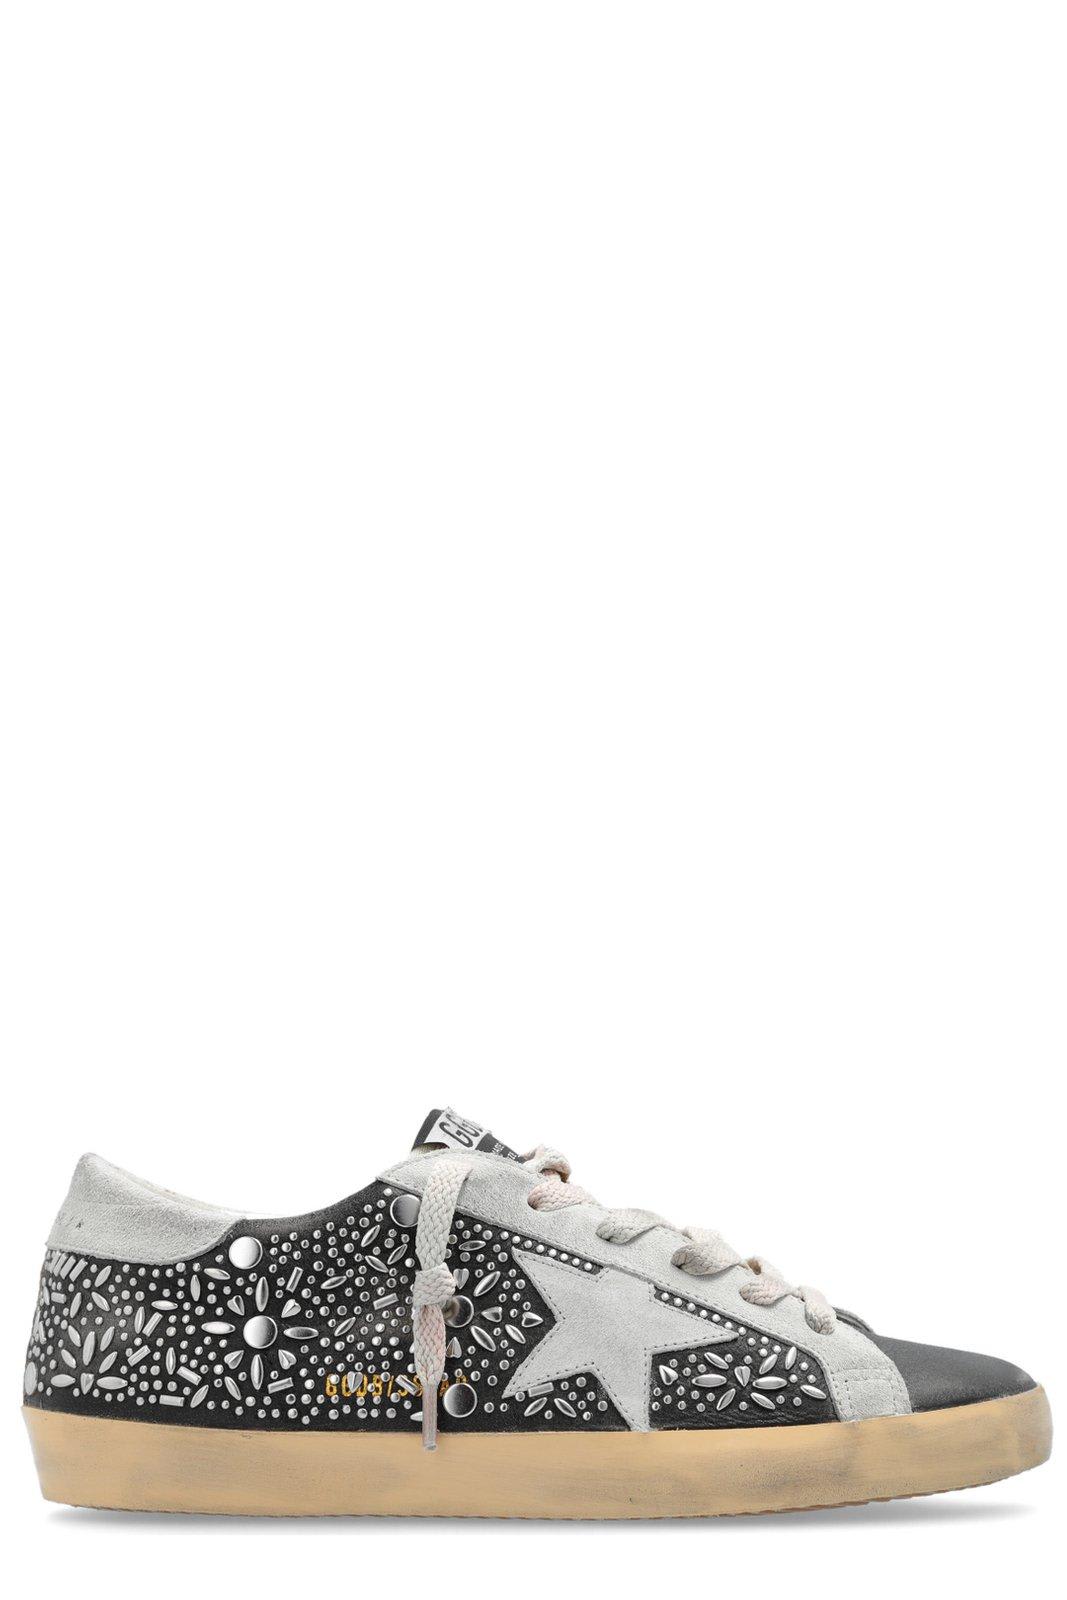 Ball Star Embellished Sneakers